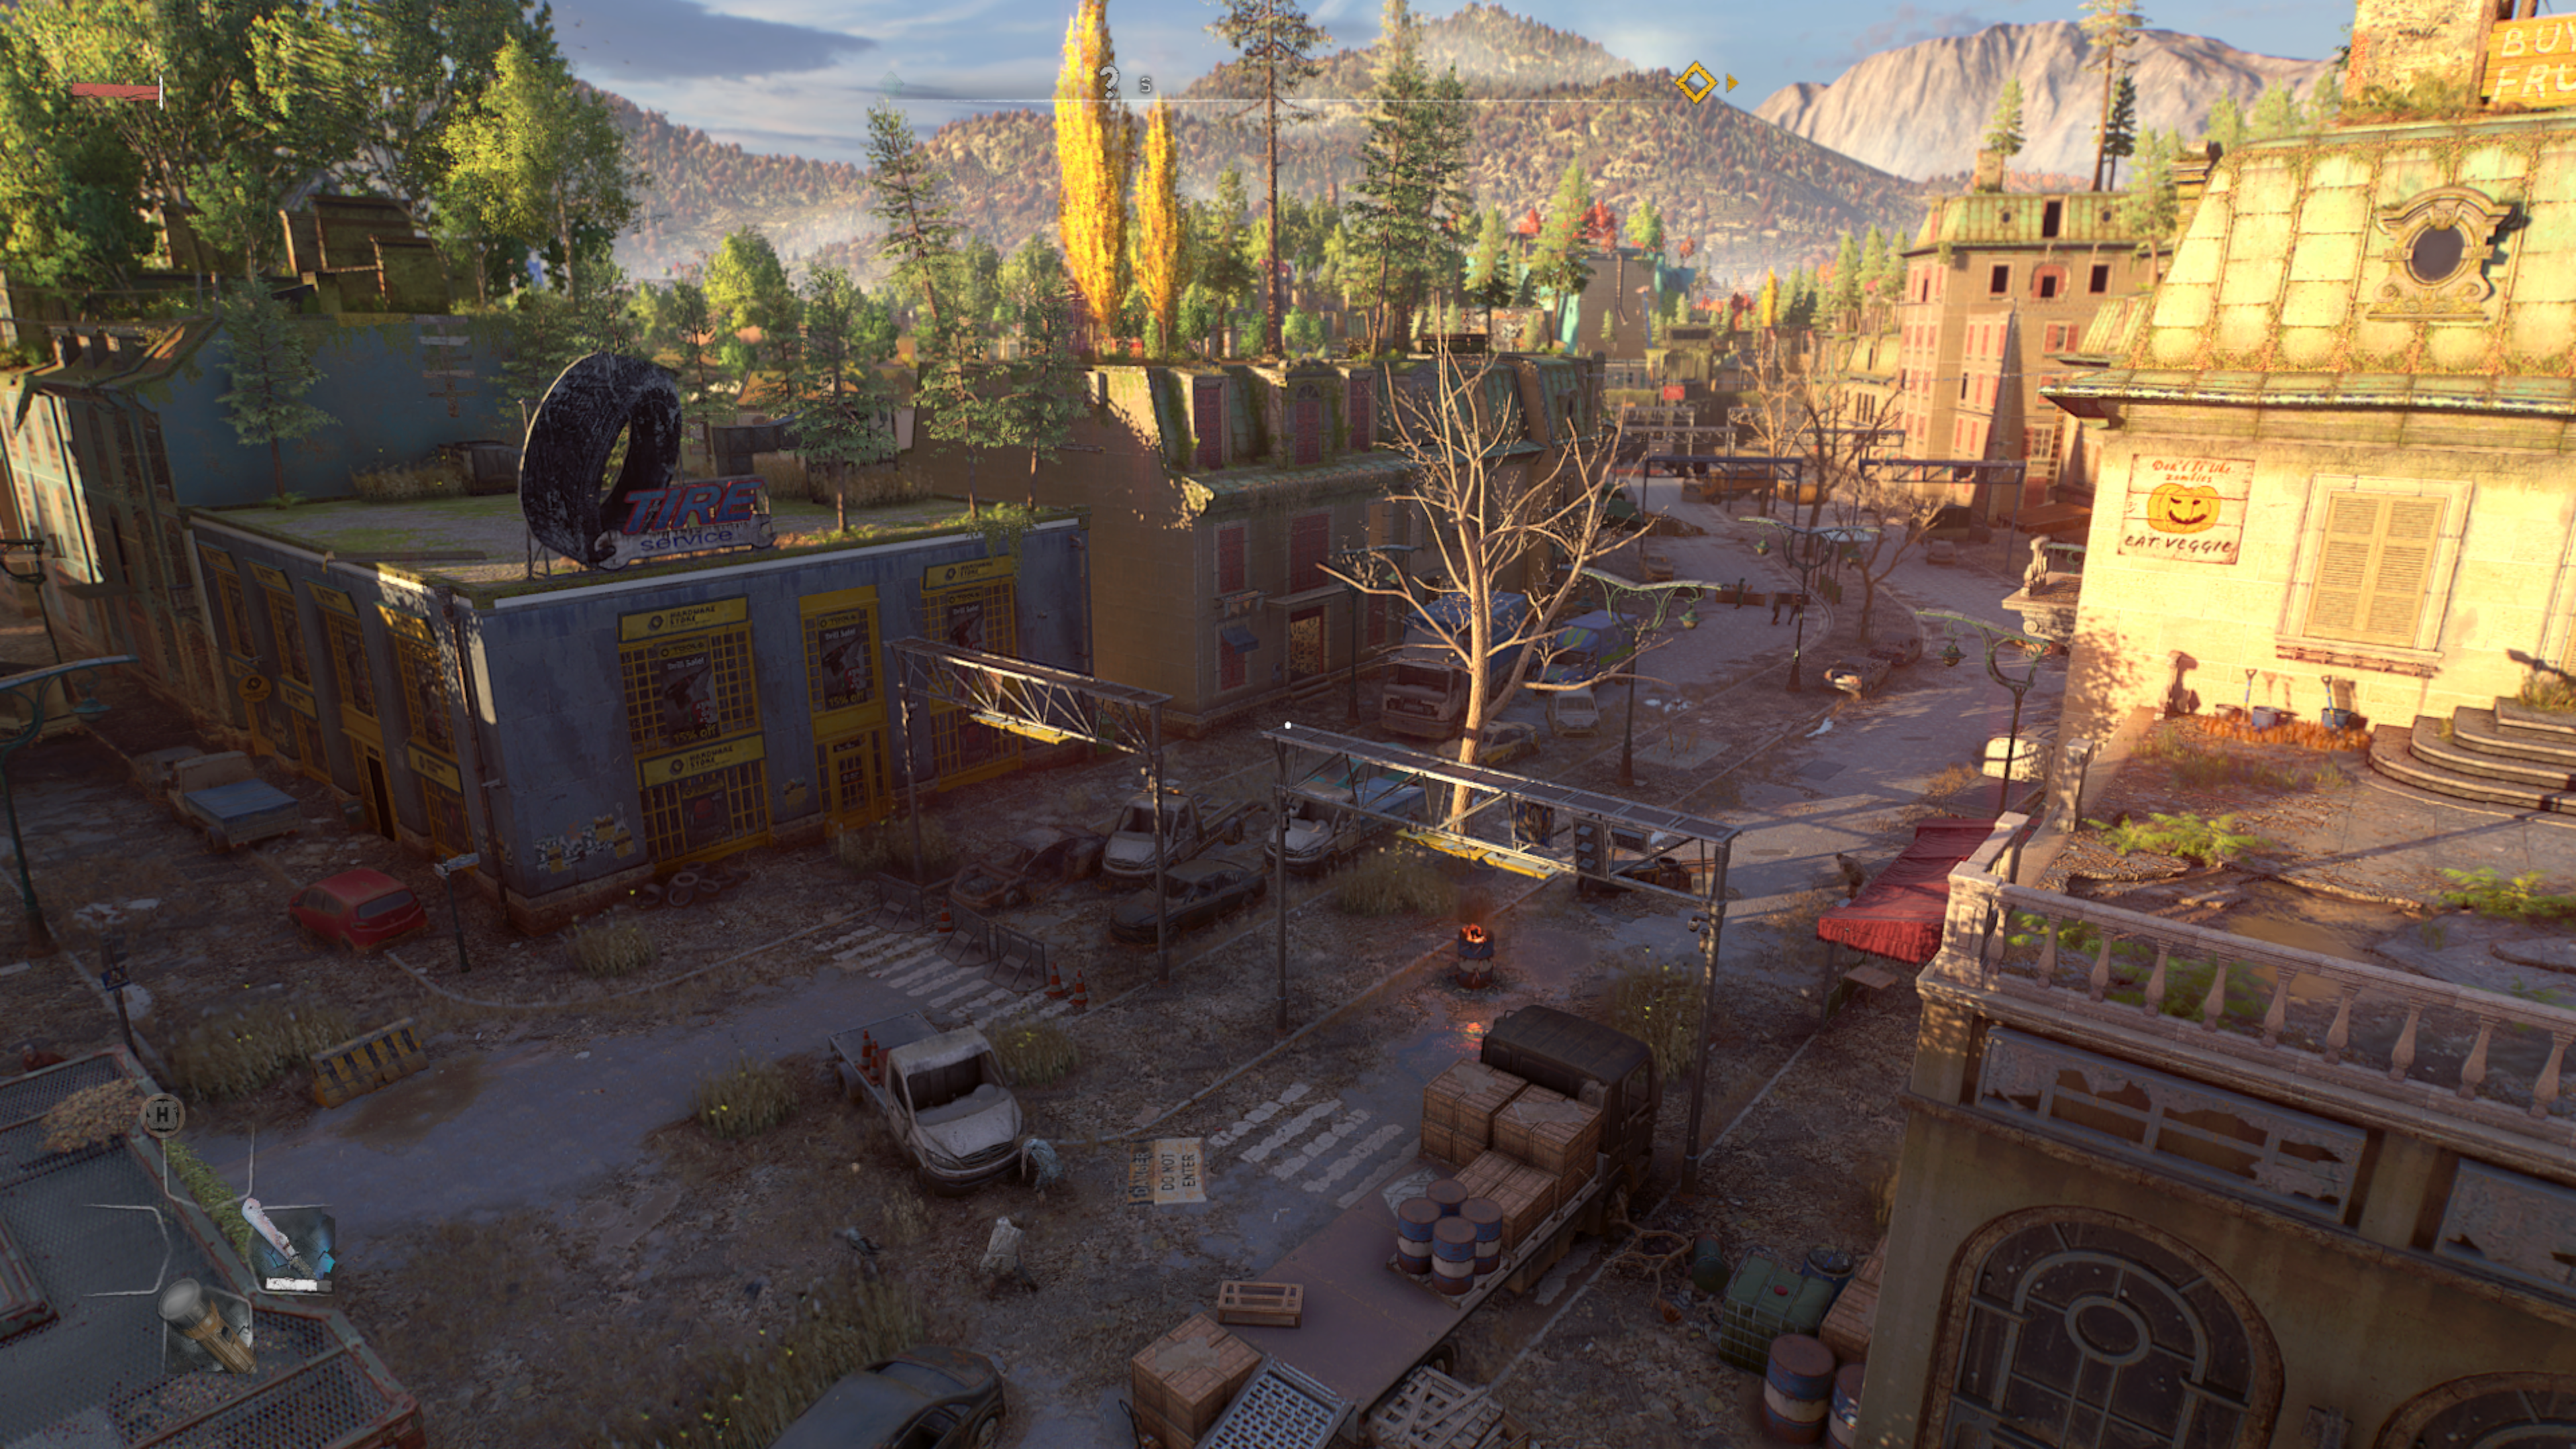 A street in Dying Light 2, captured using pre-patch DLSS.